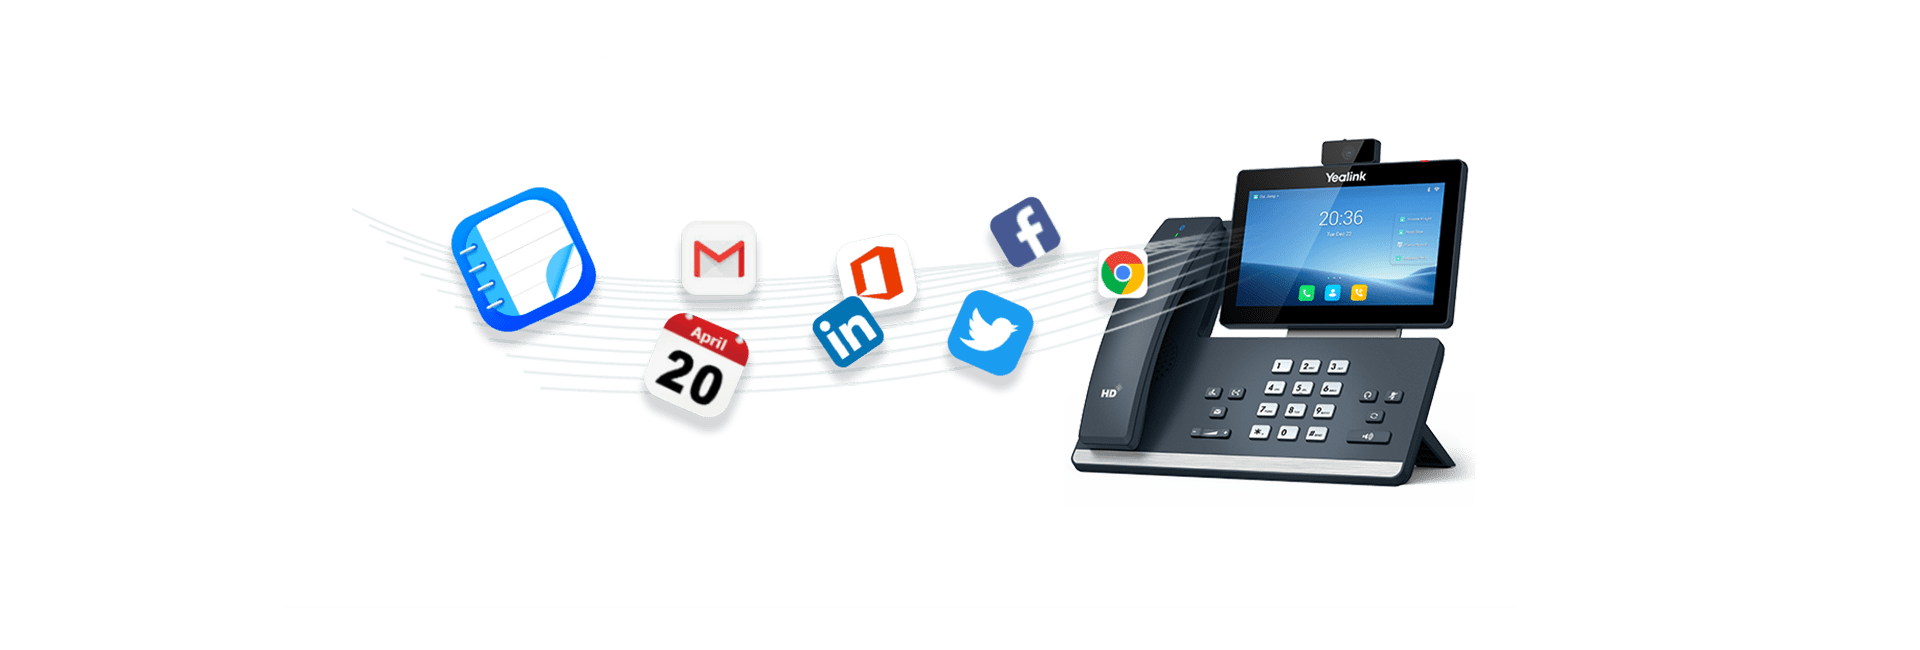 voip business phone,what are voip phone,desktop voip phone,voip phone system for small business